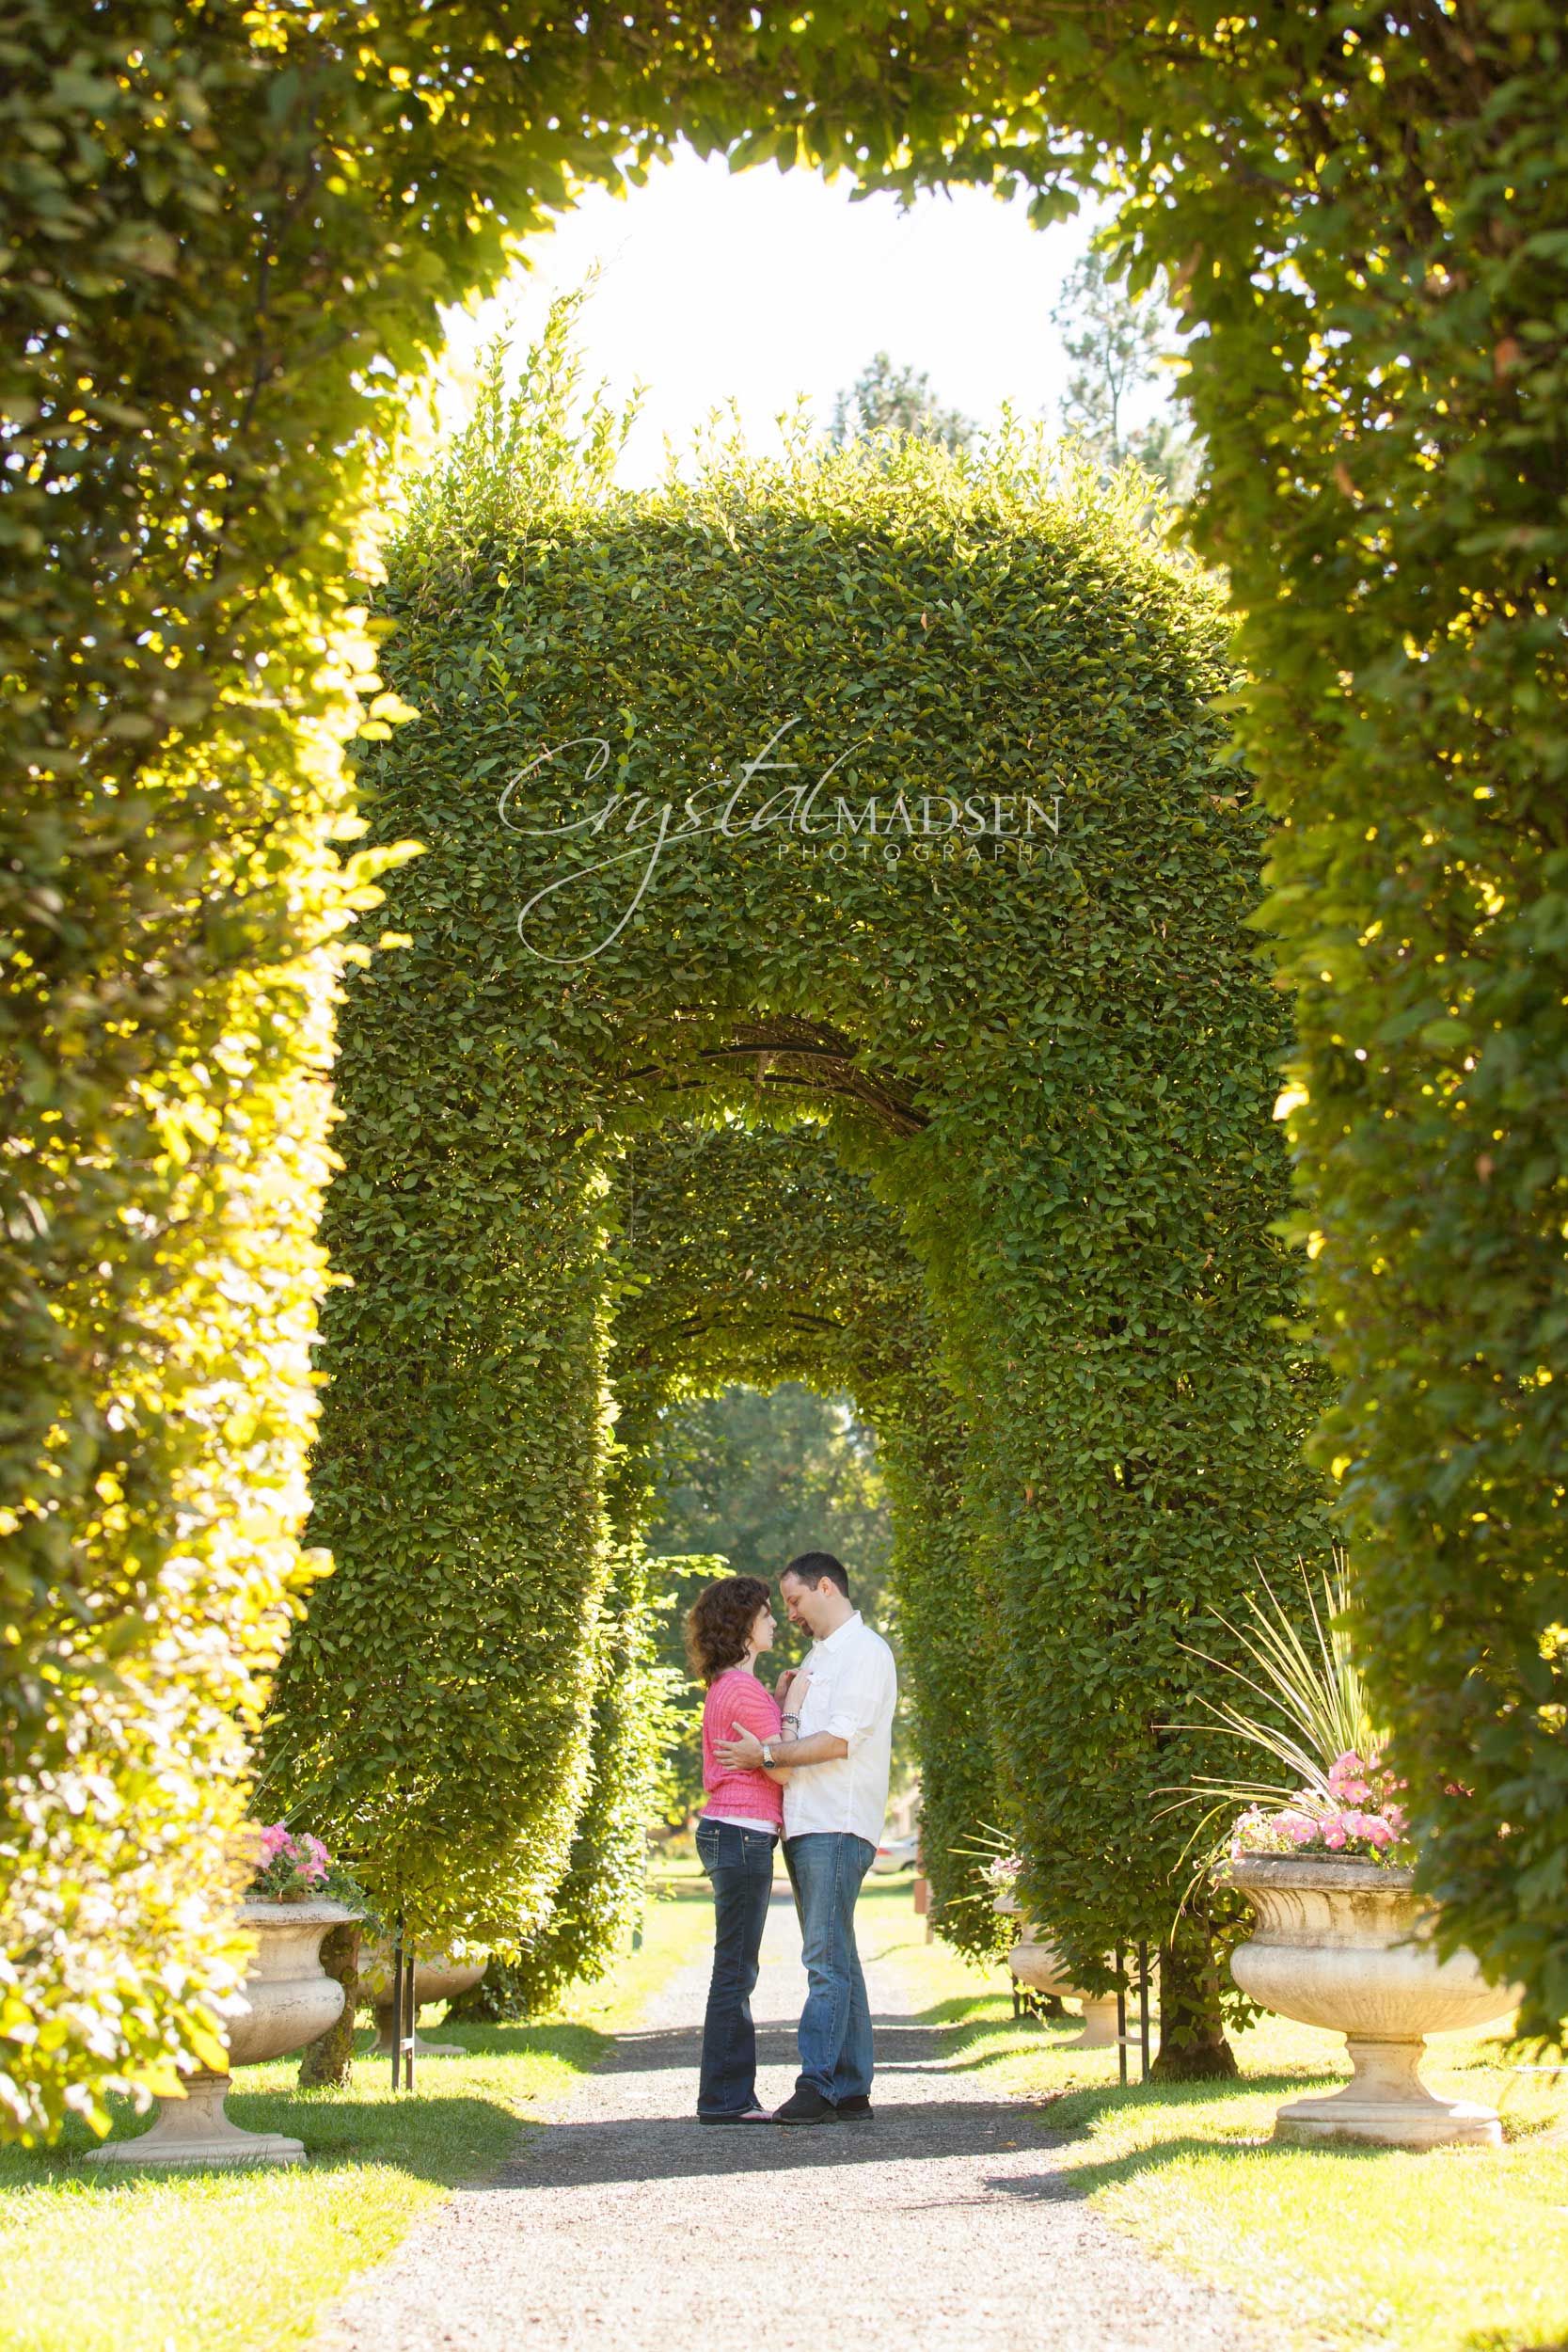 Archway of Love